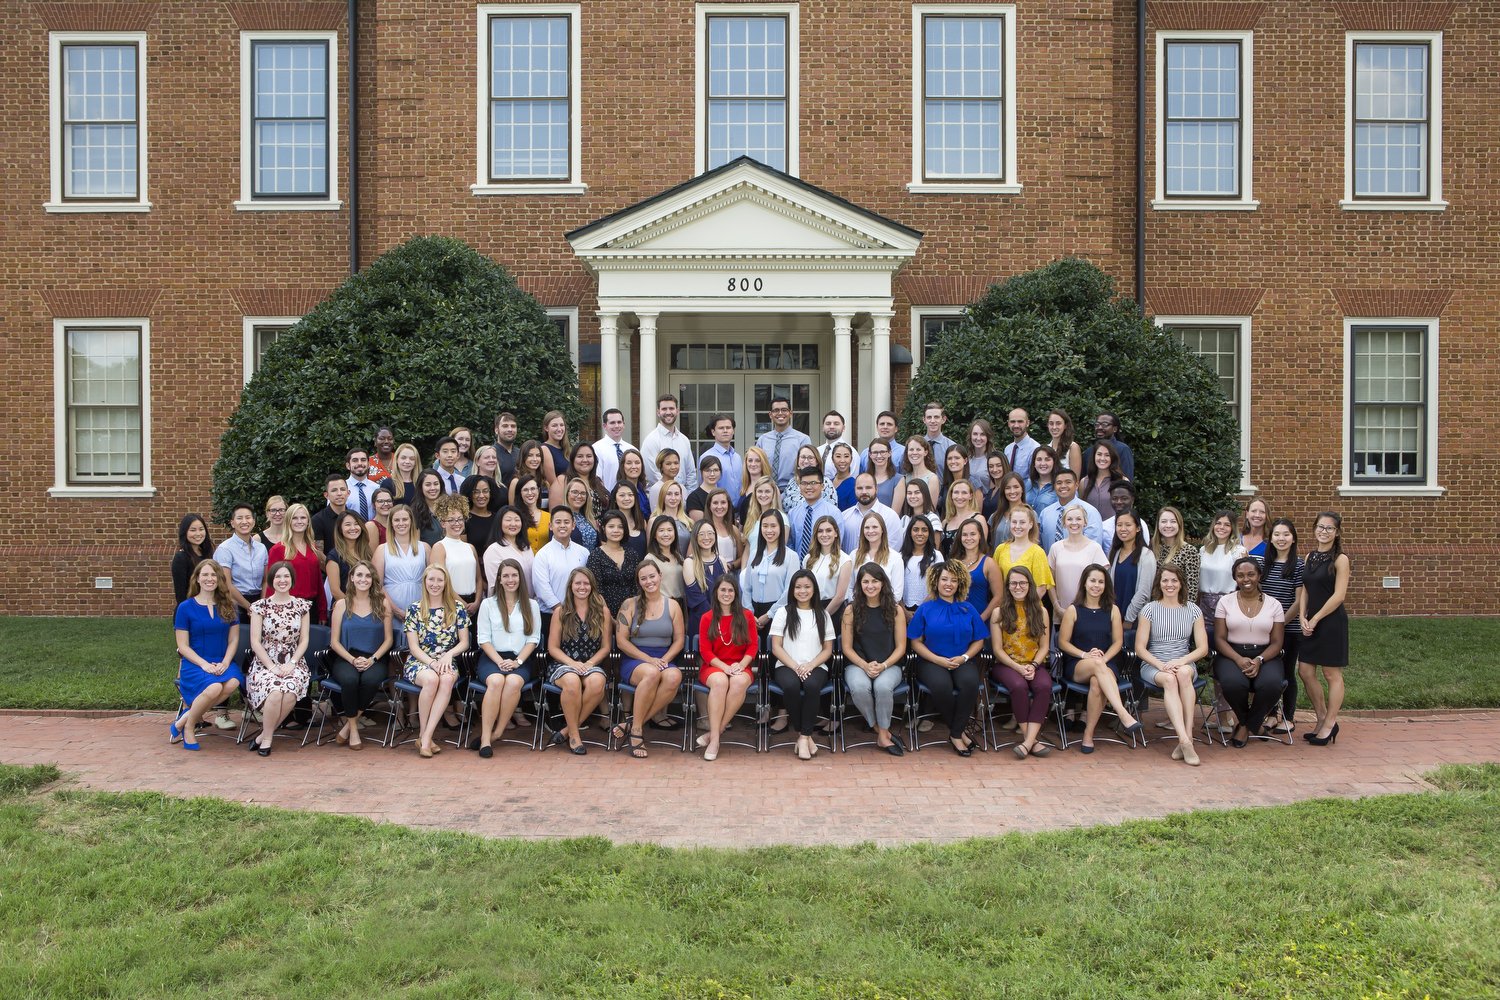  Group portrait of the Physician Assistant class of 2021 at Duke University on August 12, 2019. 